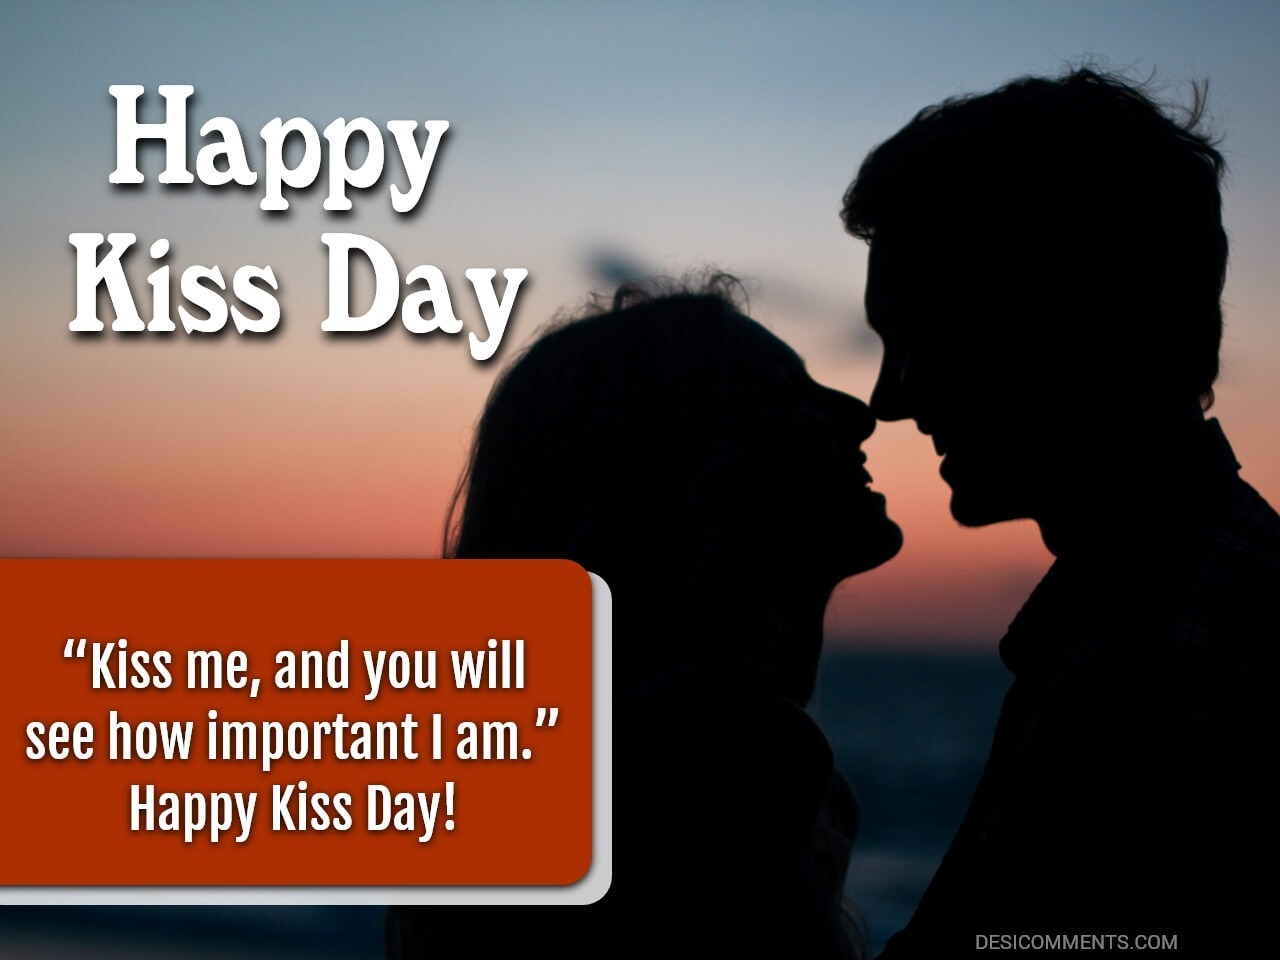 130+ Kiss Day Images, Pictures, Photos